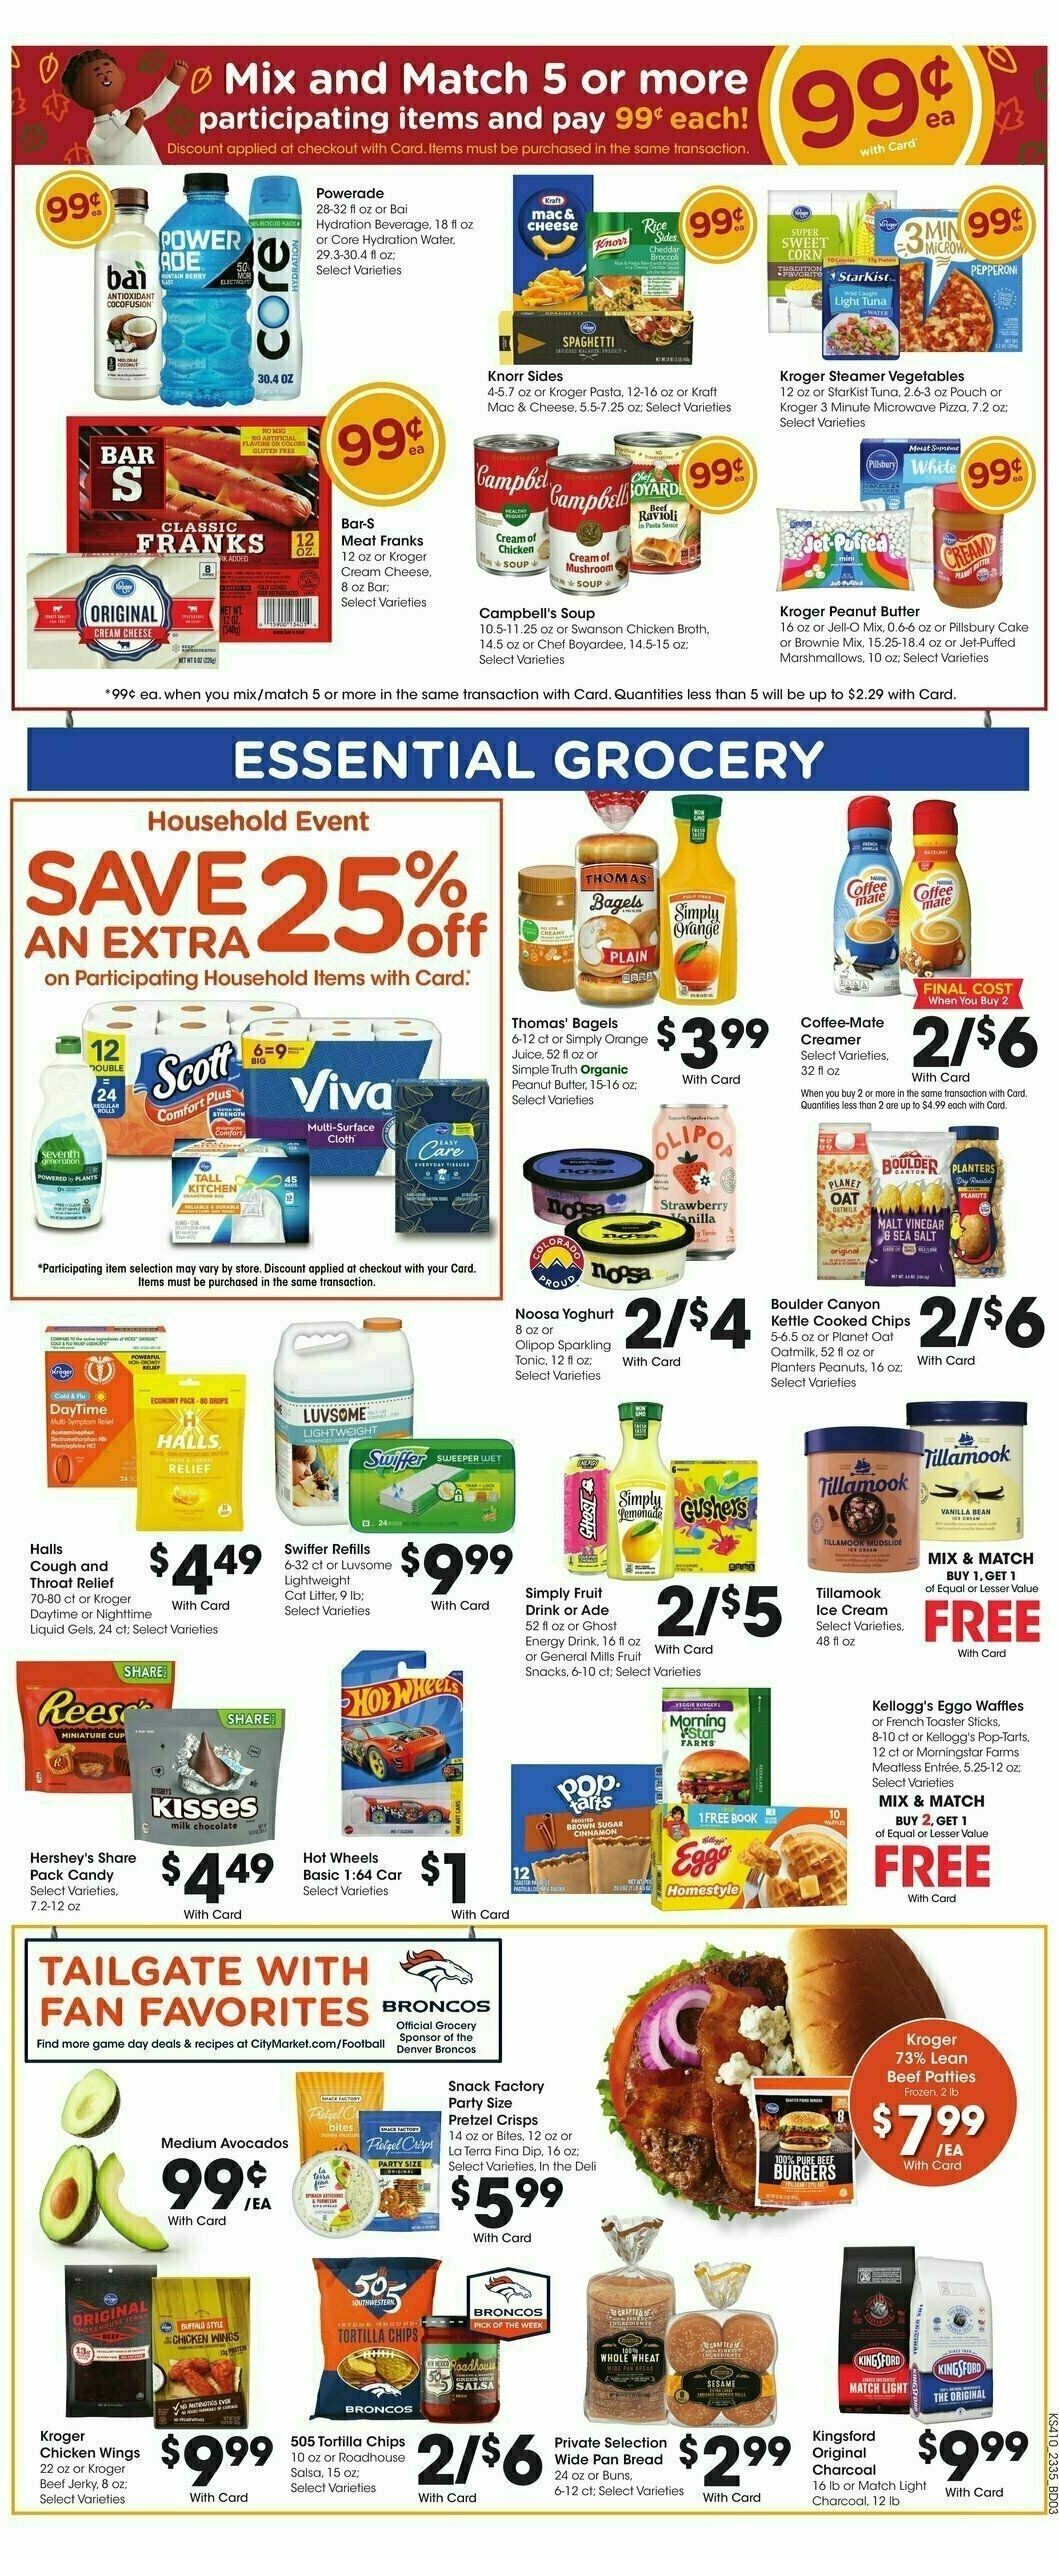 City Market Weekly Ad from September 27